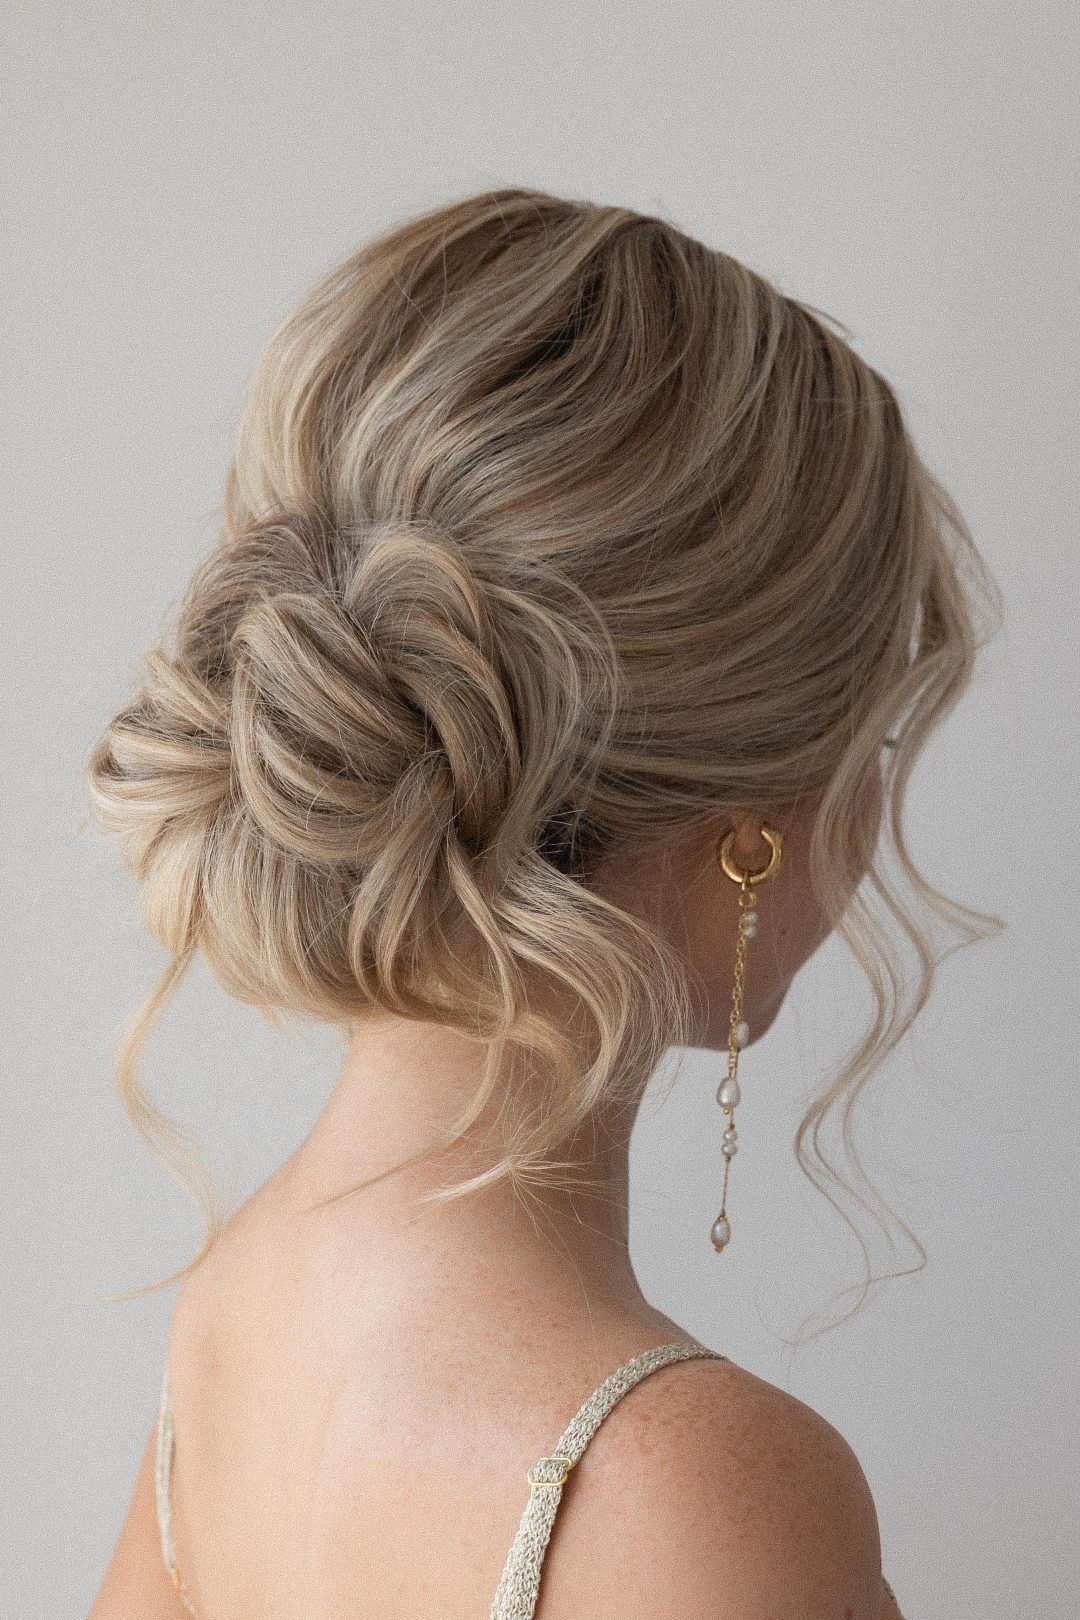 Stunning Hairstyle Ideas for Prom to Wow Your Date